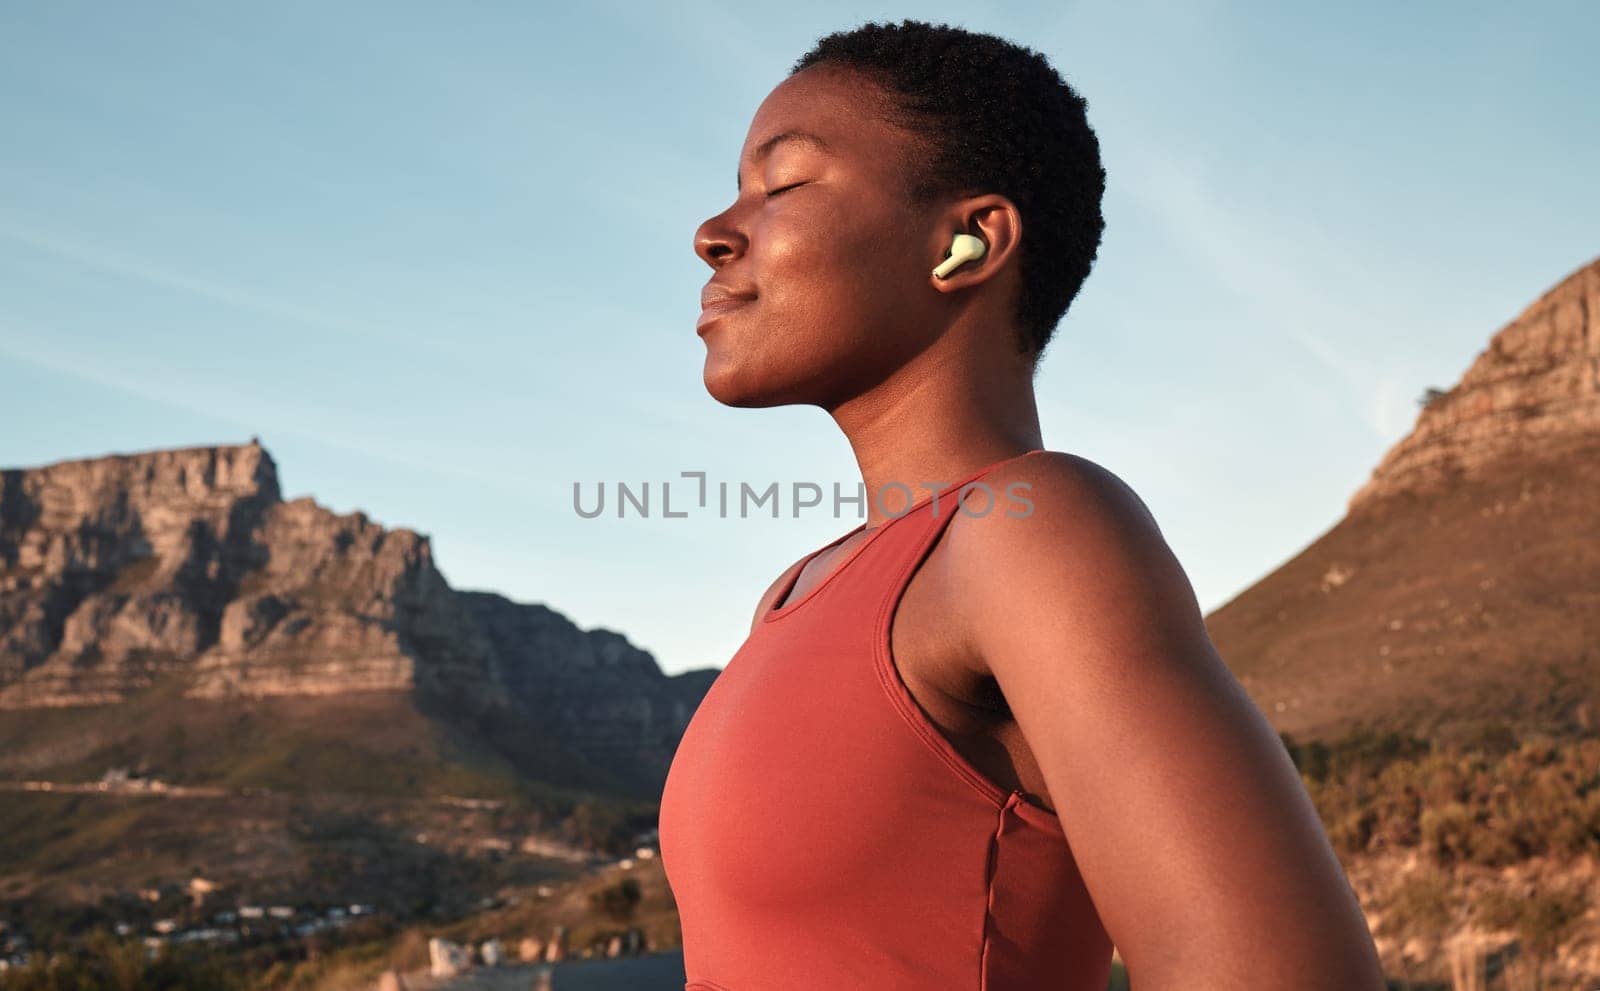 Calm black woman, outdoor fitness and breathing in nature, Cape Town mountains and meditation of motivation, health or relax mindset. Female athlete, breathe and workout peace for zen sports wellness.